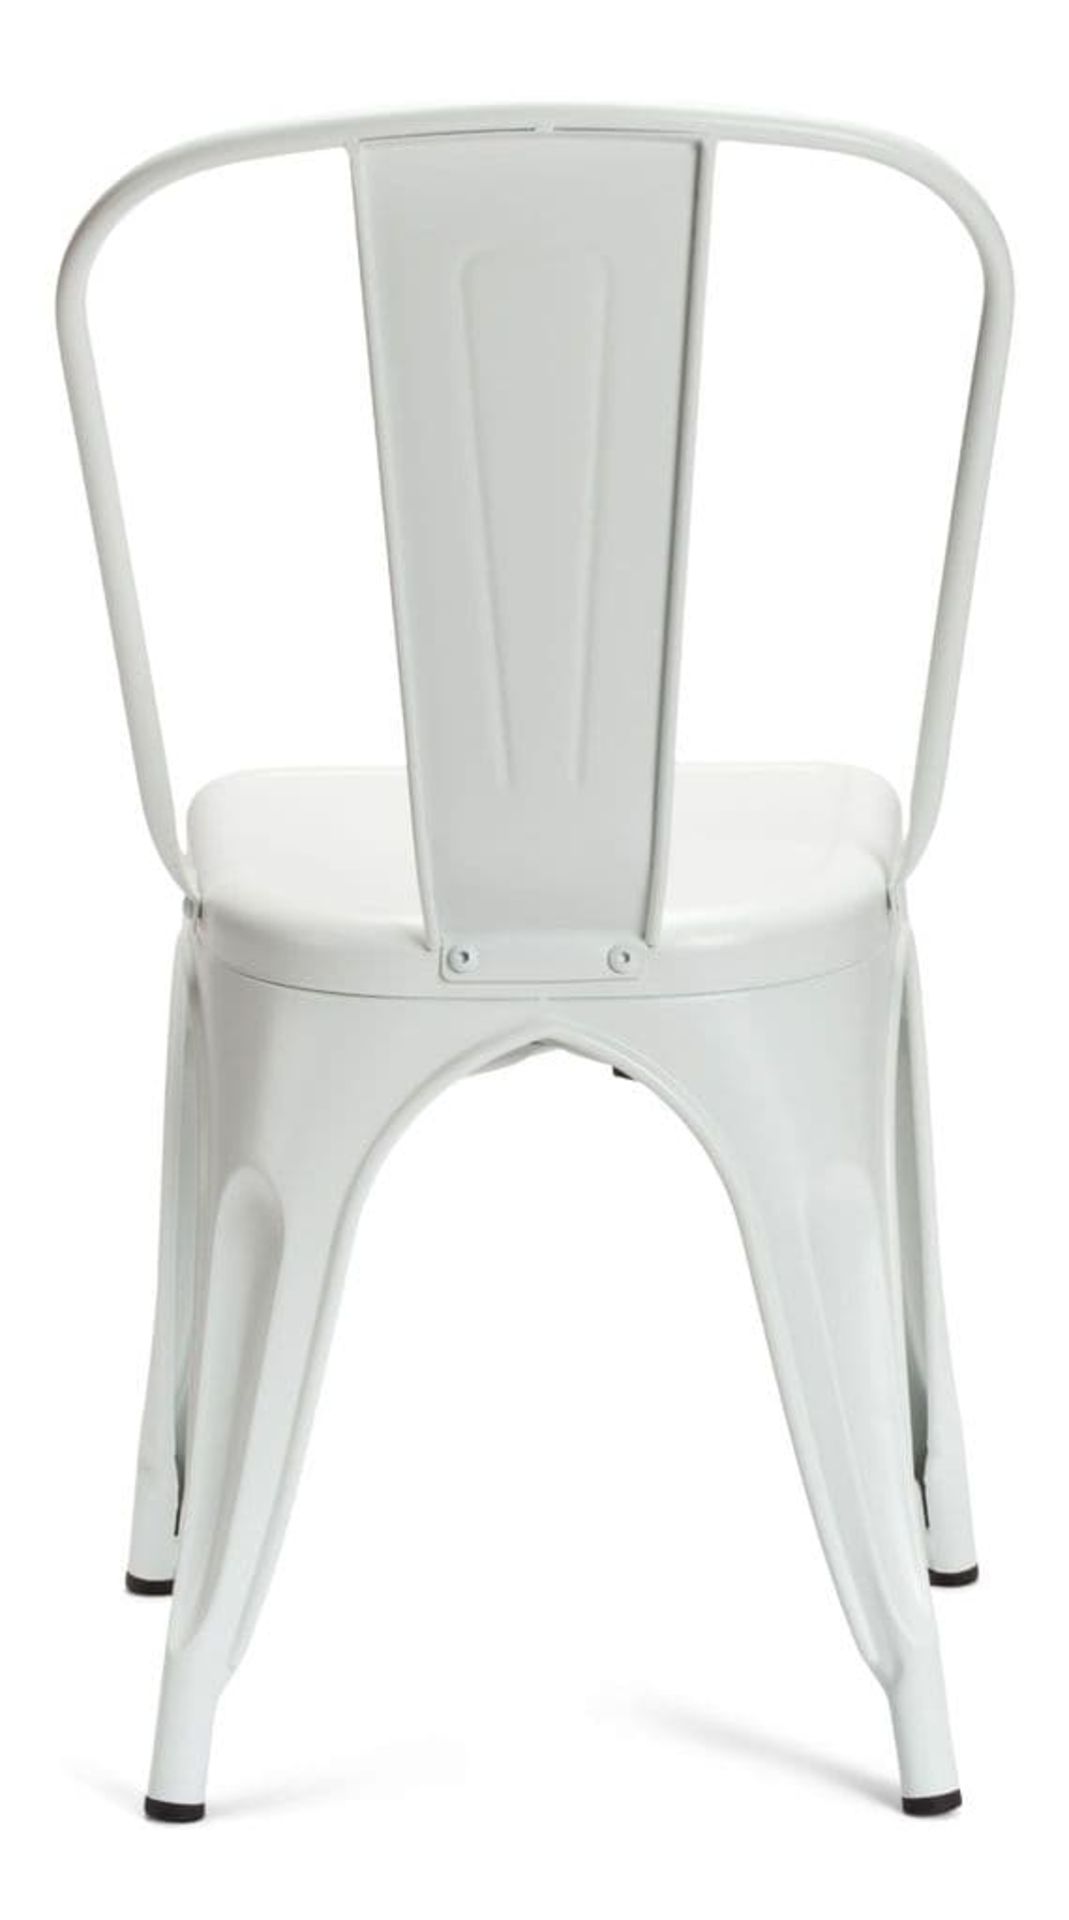 1 x Tolix Industrial Style Outdoor Bistro Table and Chair Set in White- Includes 1 x Table and 4 x - Image 7 of 12